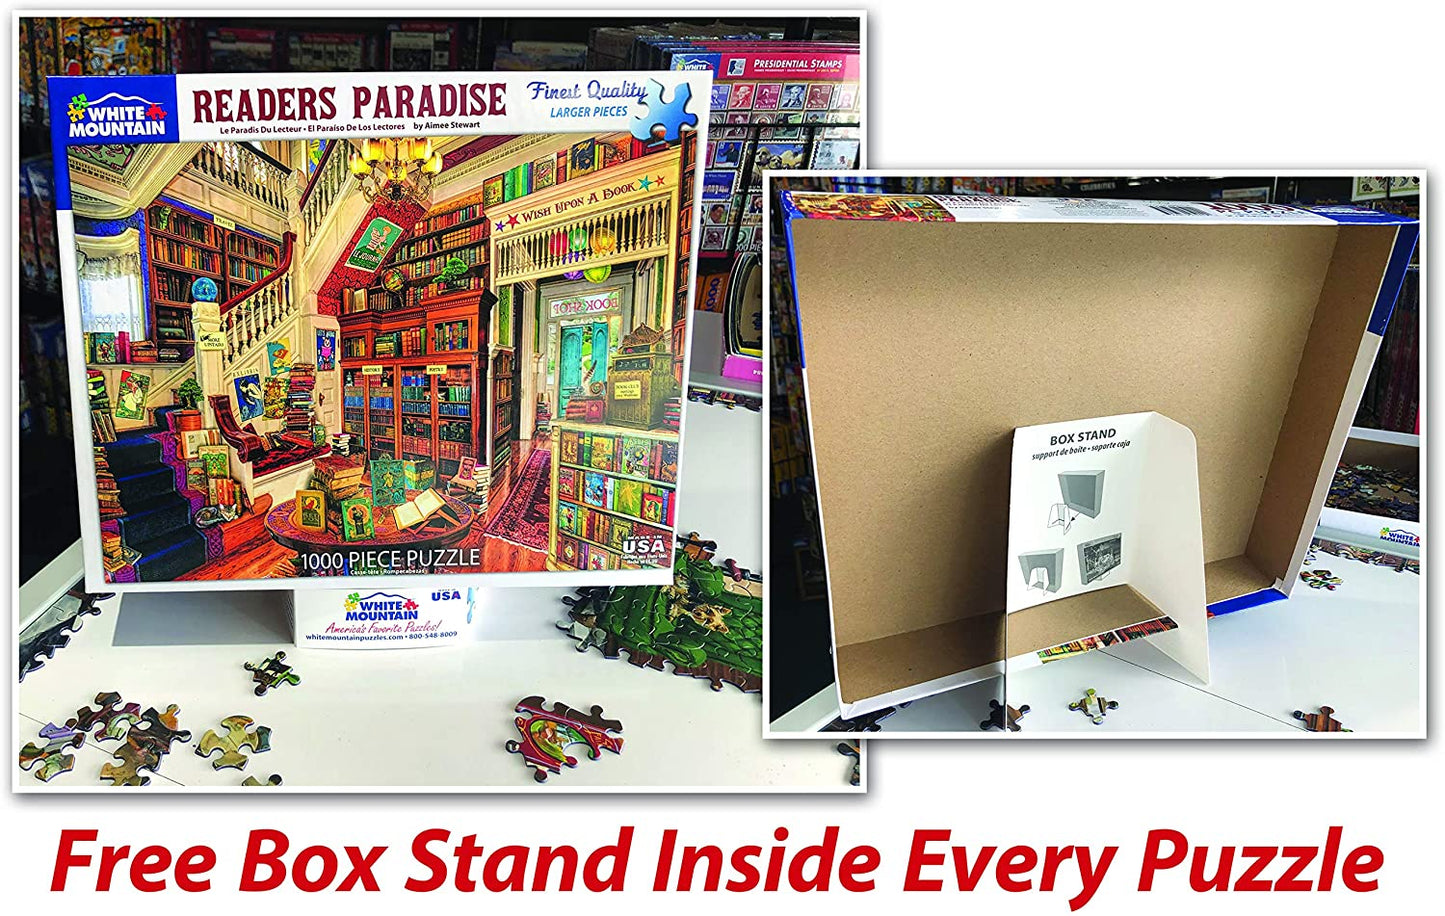 picture showing front and back of the box and how every box comes with a free box stand 